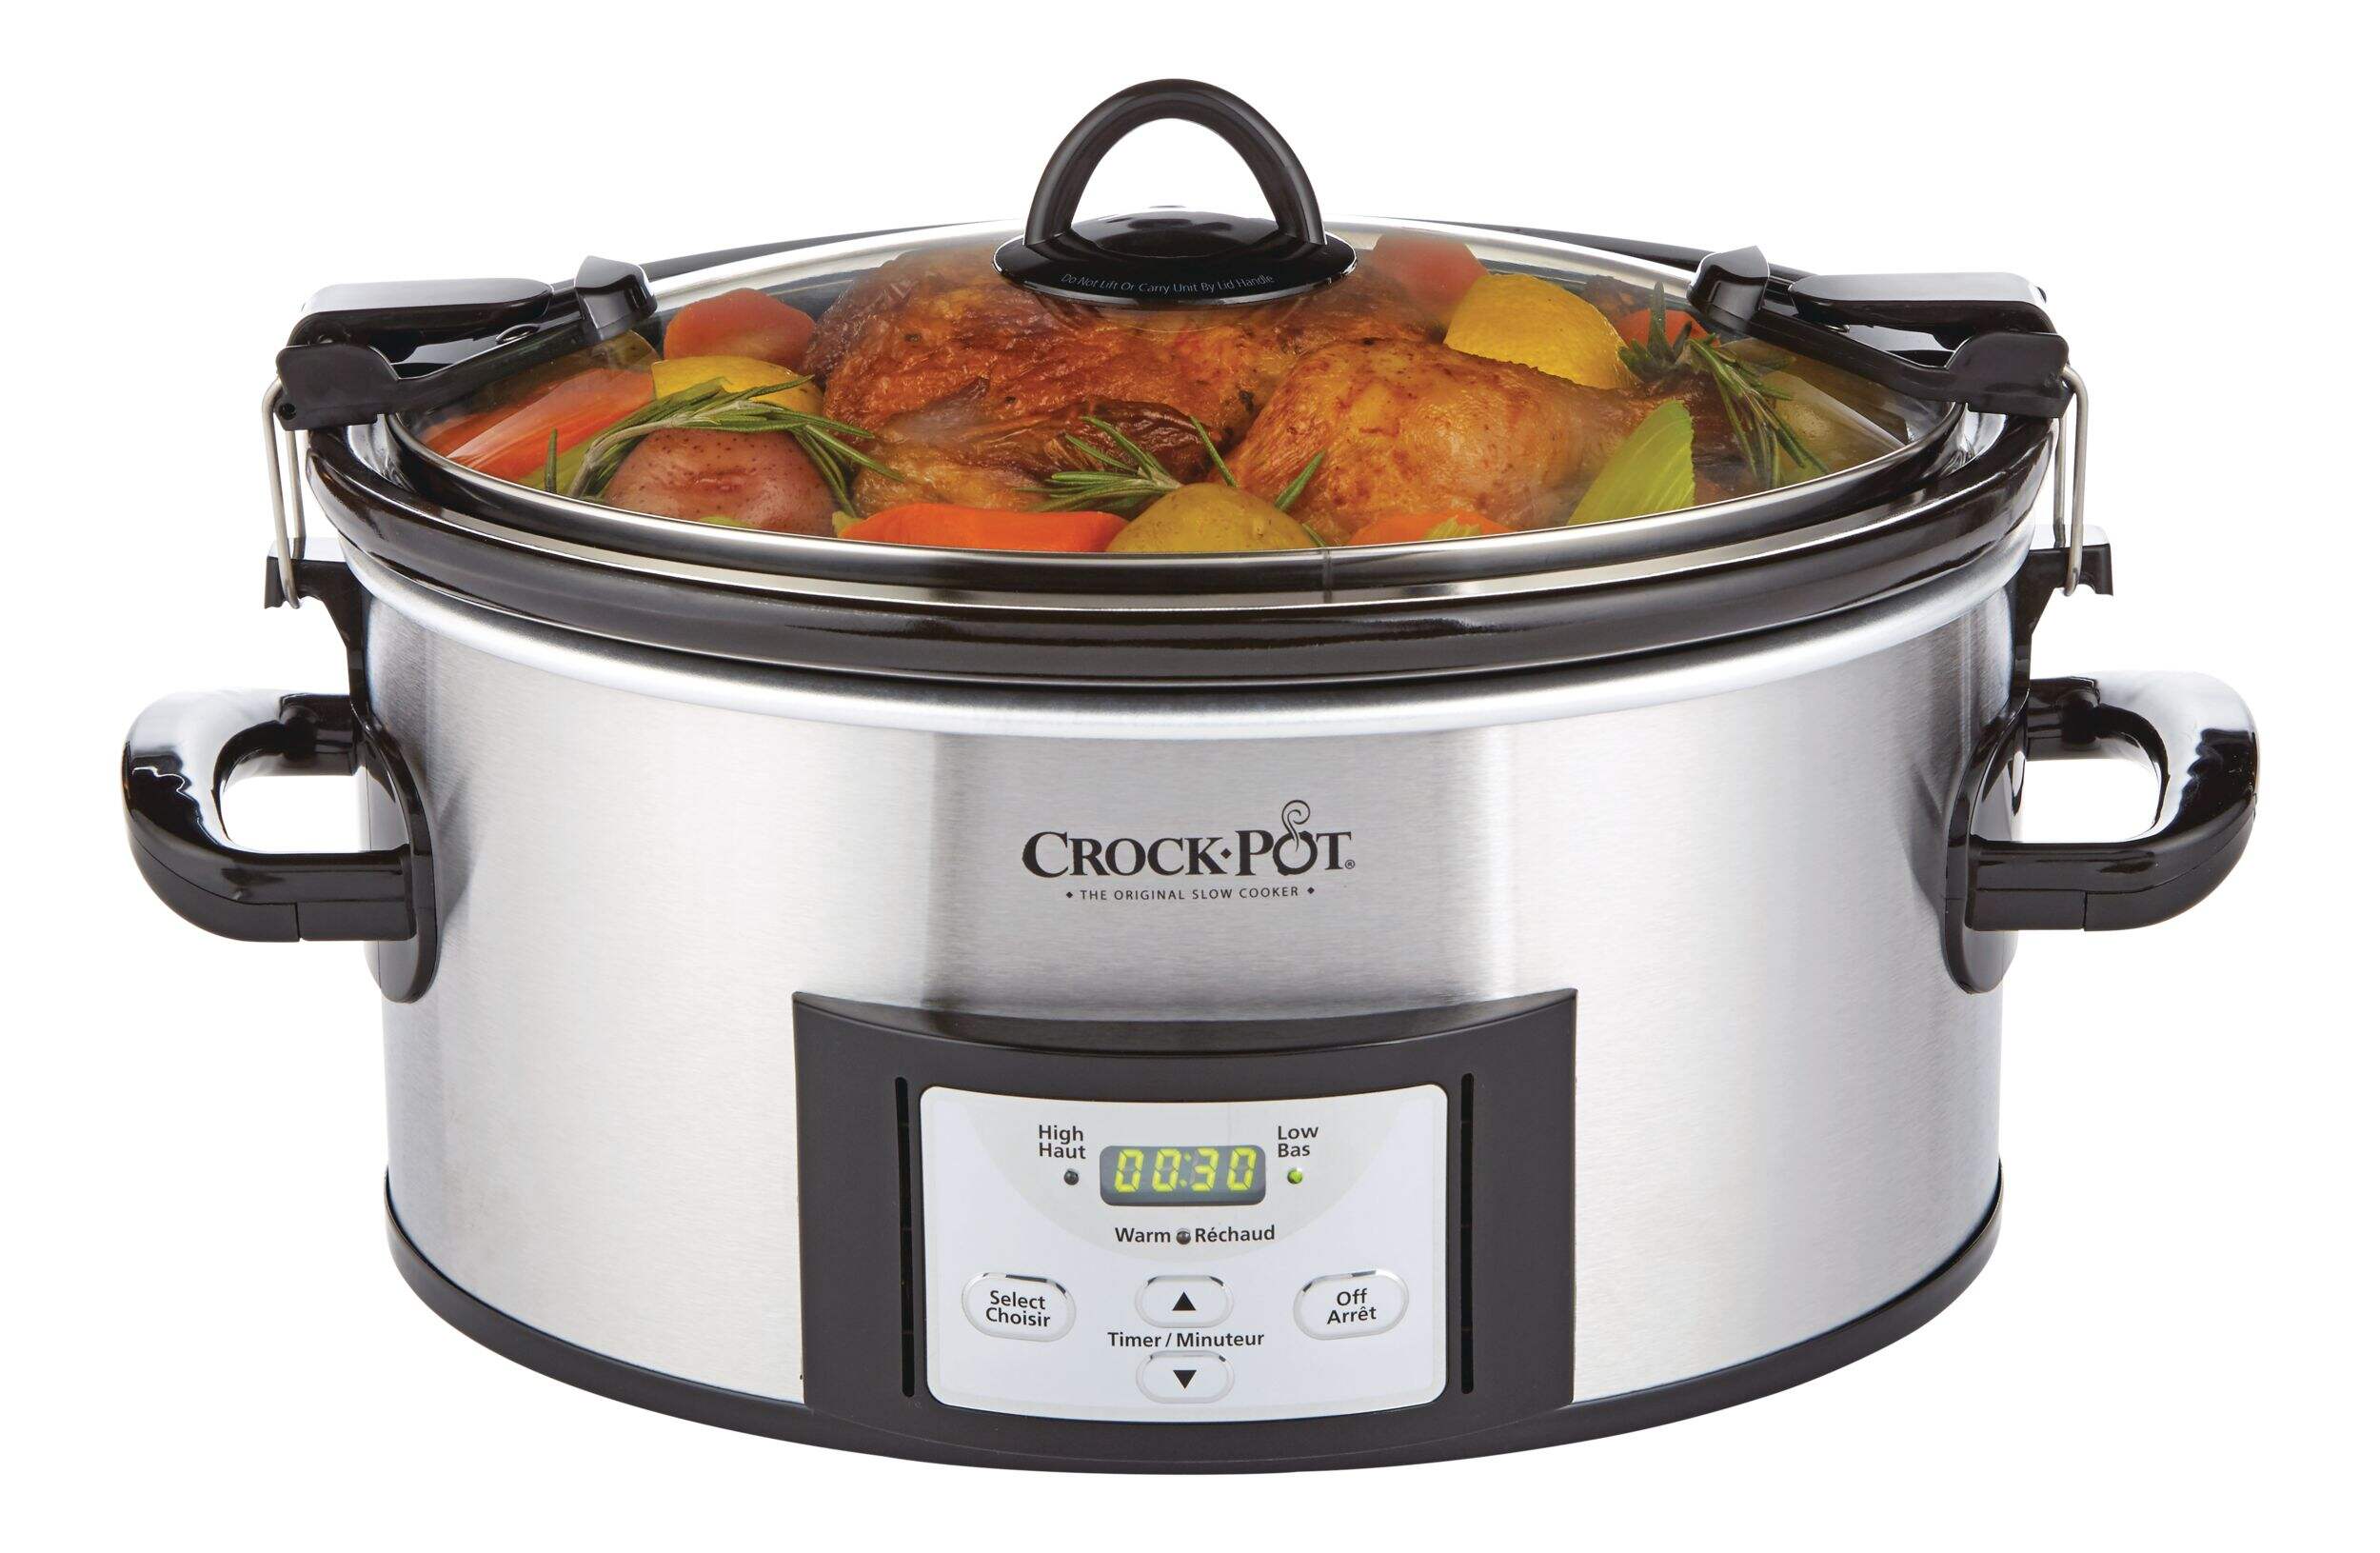 Crock-Pot 6-Quart Cook & Carry Slow Cooker, Programmable, Stainless ...